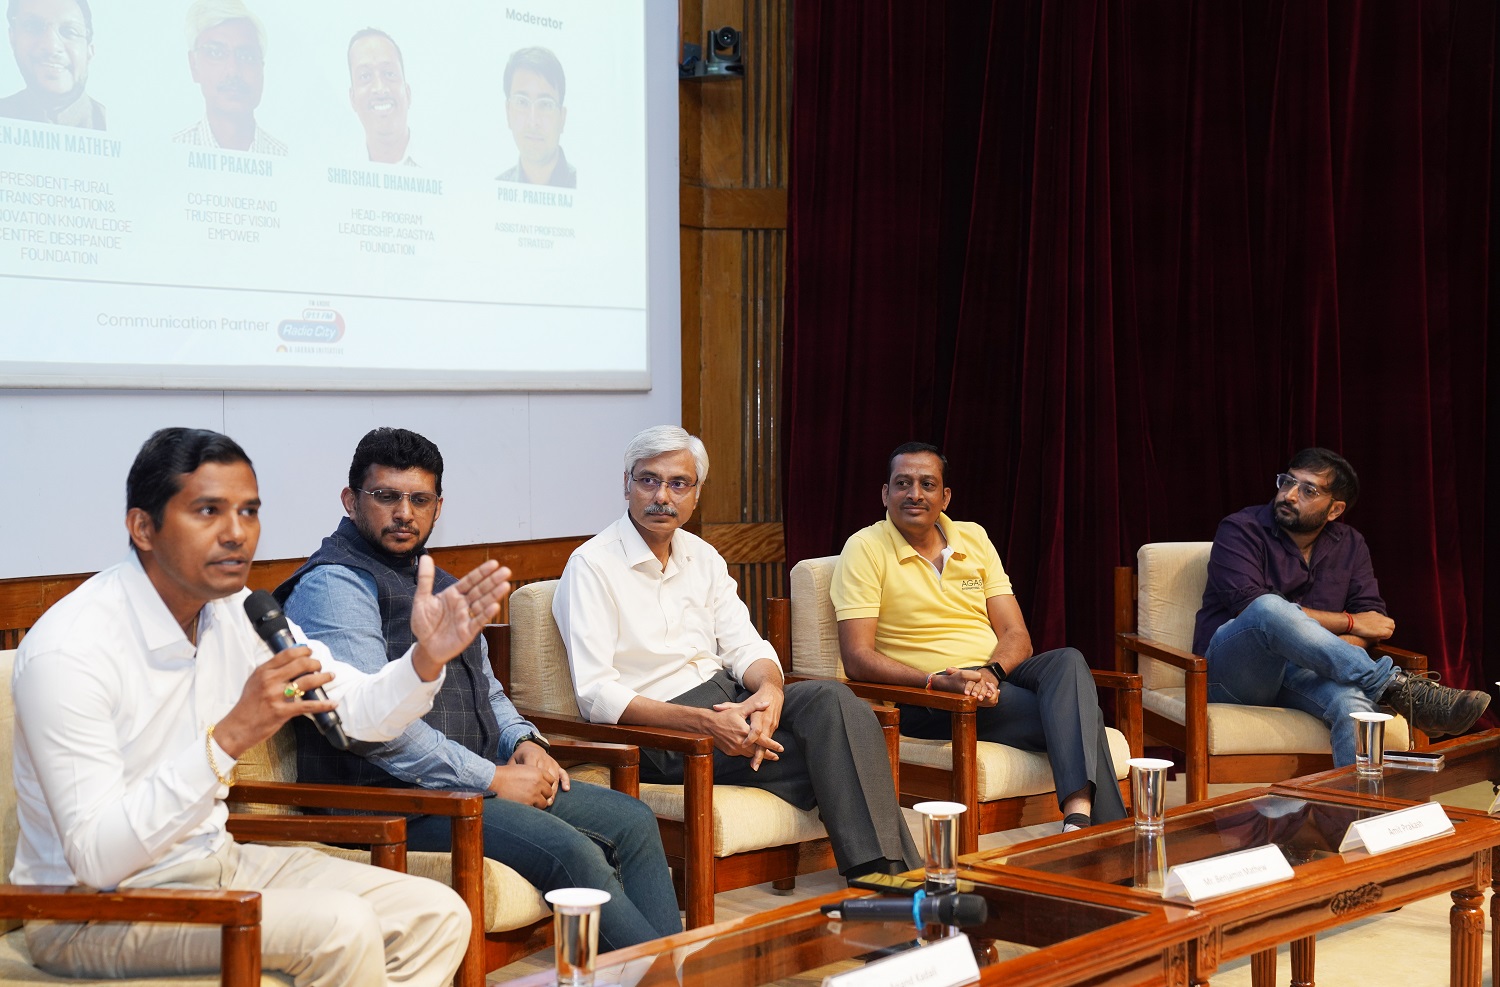 (L-R): Kadali Anand Kumar, Director and Board Member of Annapoorna Trust; Benjamin Mathew, President, Rural Transformation and Innovation Knowledge Center, Deshpande Foundation; Amit Prakash, Co-founder and Trustee, Vision Empower Trust; Shrishail Dhanawade, Head of Program Leadership, Agastya International Foundation, and Prof. Prateek Raj, faculty from the Strategy area, IIMB, at the panel discussion on, 'Sustainability as a Service: NGOs Driving Community-led Solutions'.